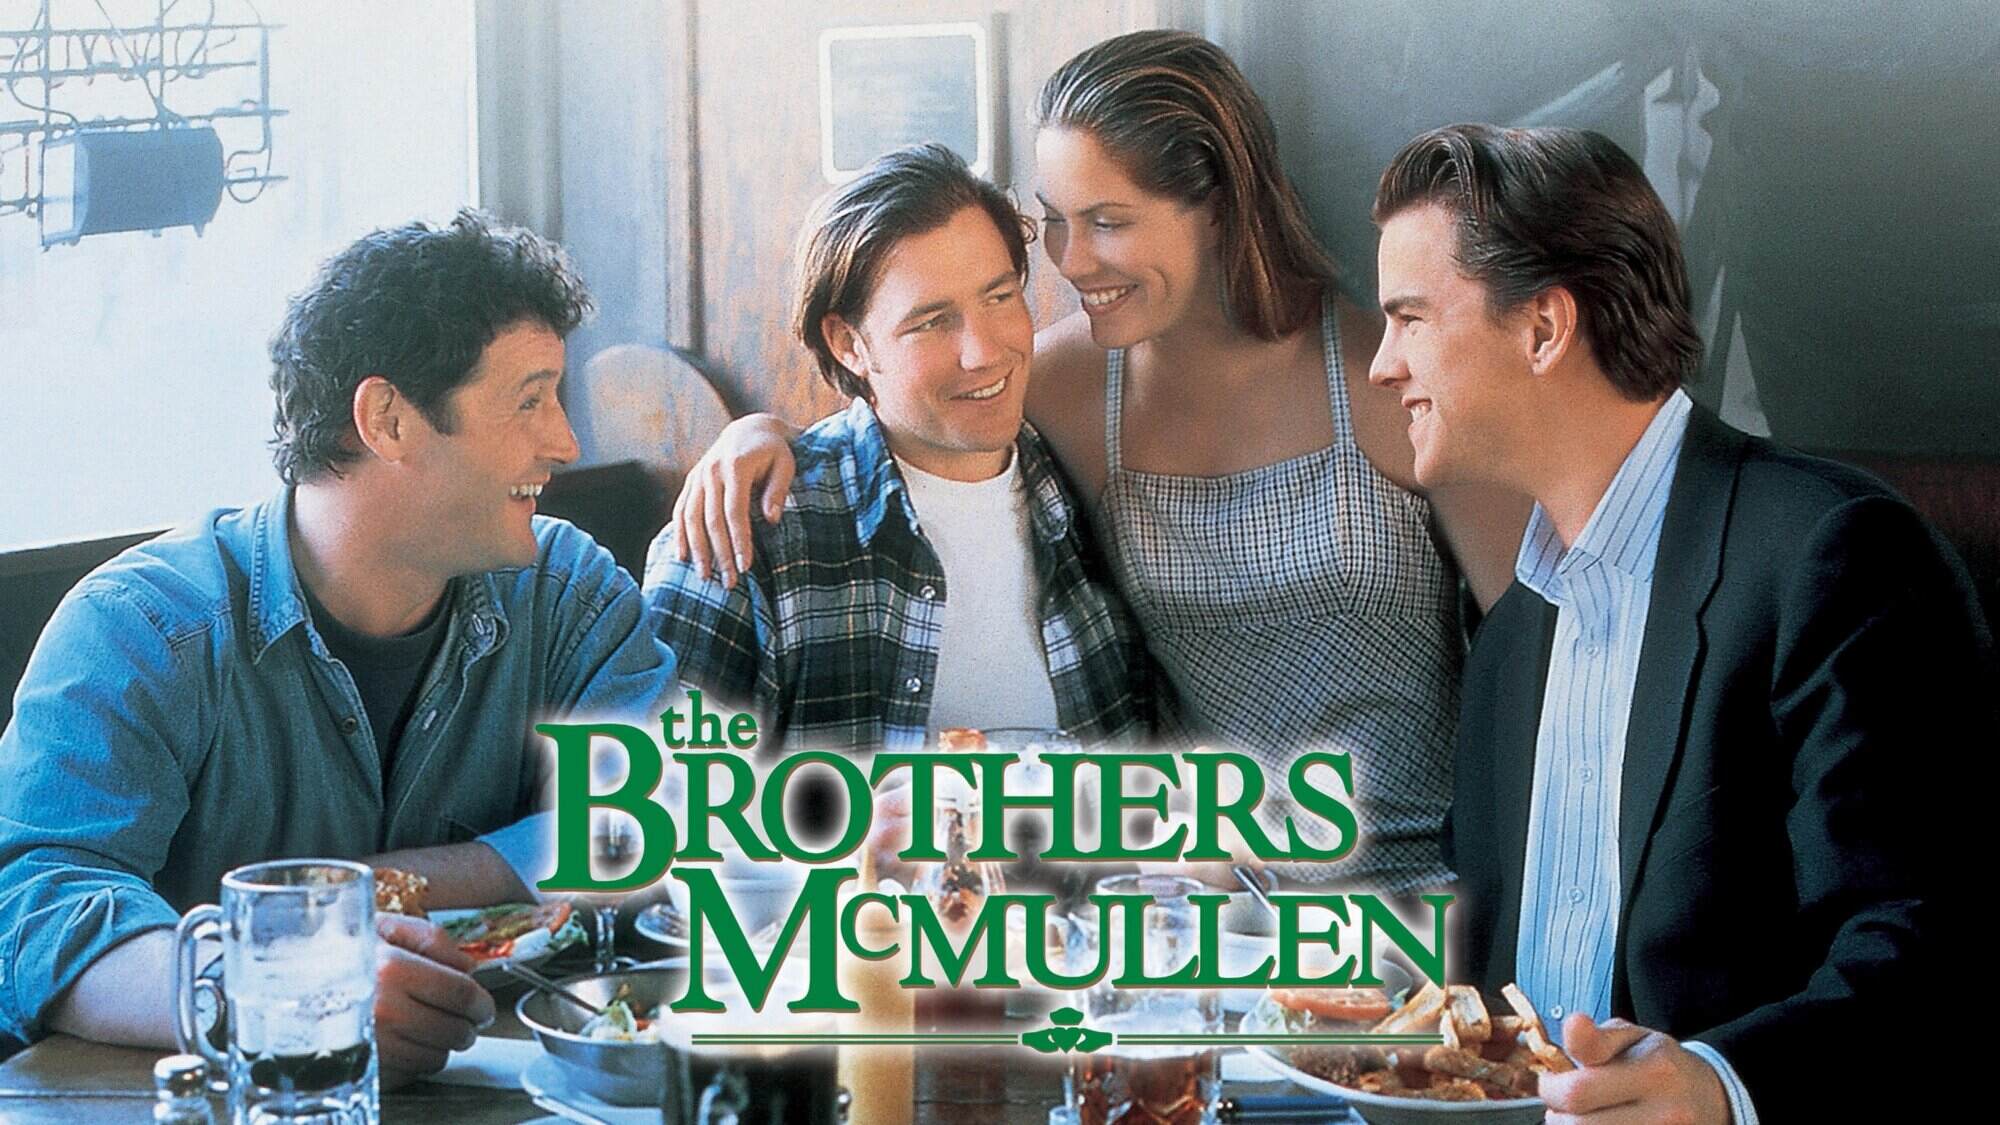 36-facts-about-the-movie-the-brothers-mcmullen